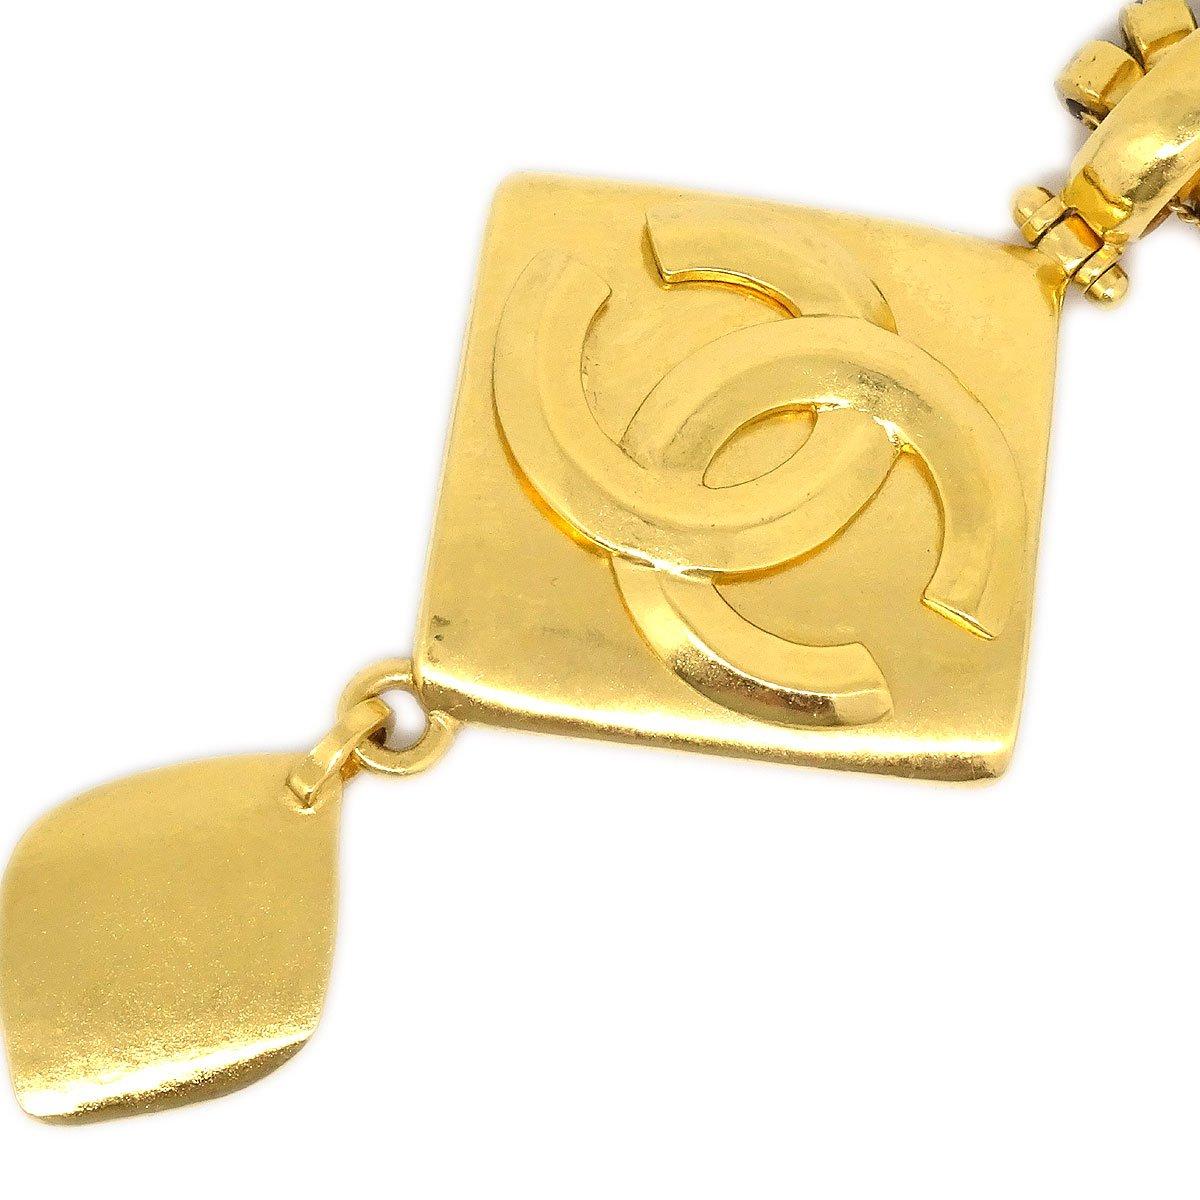 Pre-Owned Vintage Condition
From 1996 Collection
24K Gold Plating
Metal
Total Chain Length 30